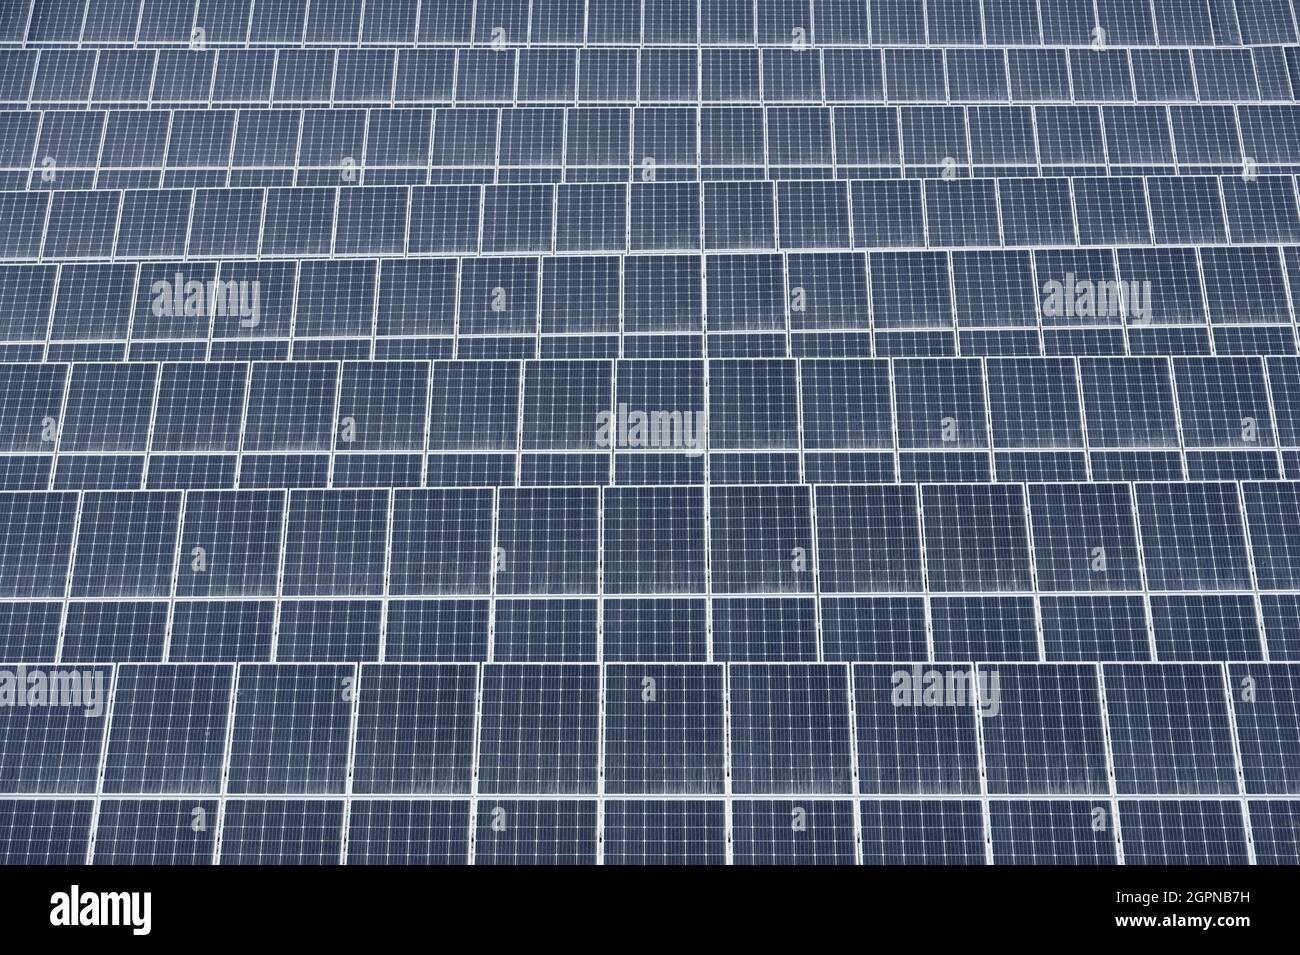 Rows of photovoltaic panels, solar power station pattern Stock Photo